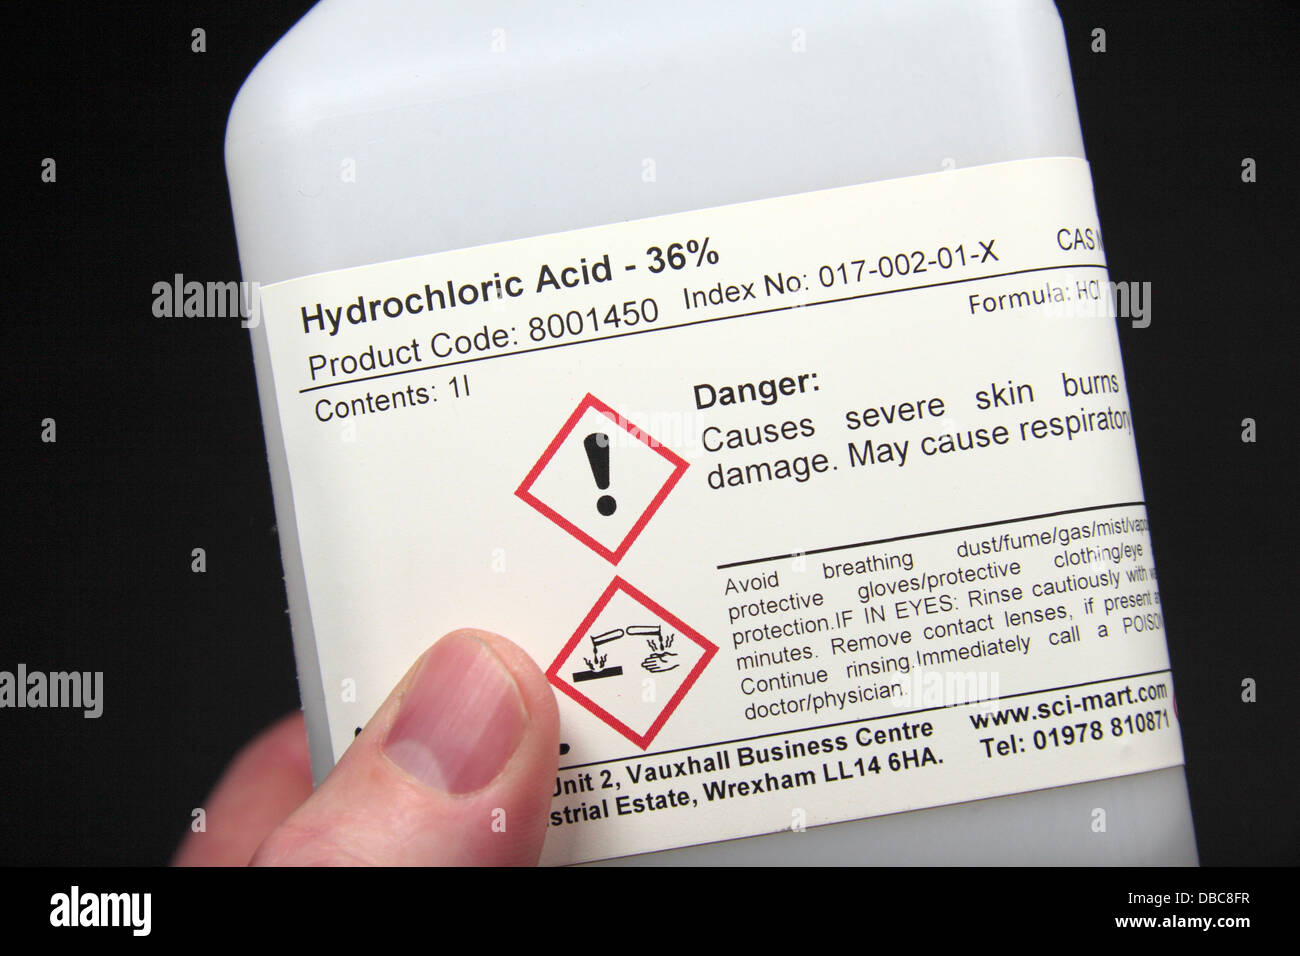 A bottle of Hydrochloric acid (36% - molarity 11.64, laboratory grade) as used in a UK high school. Stock Photo